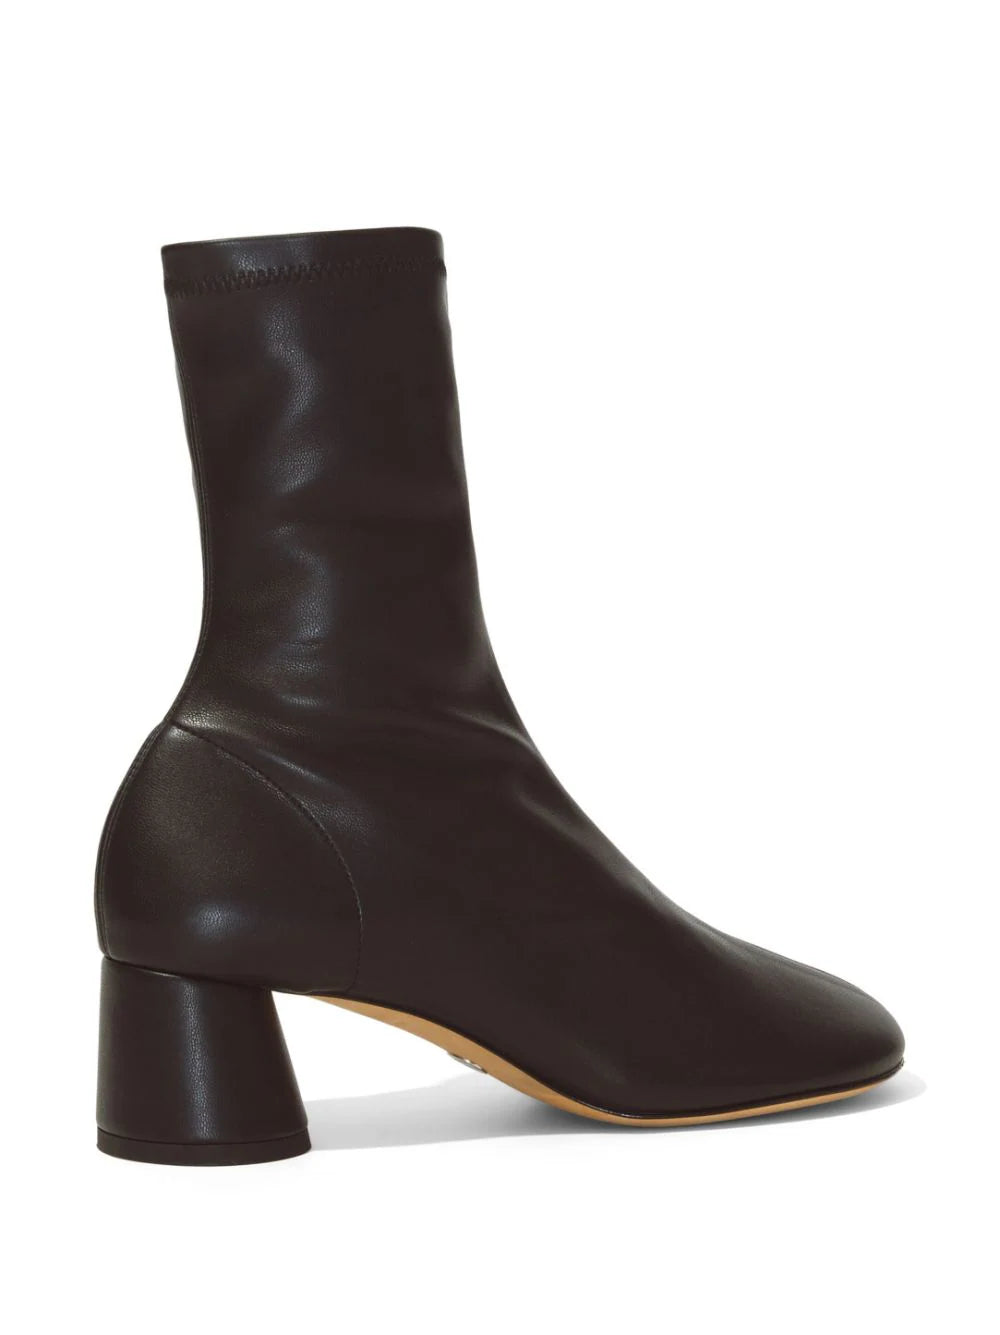 Glove Stretch Ankle Boots in Black